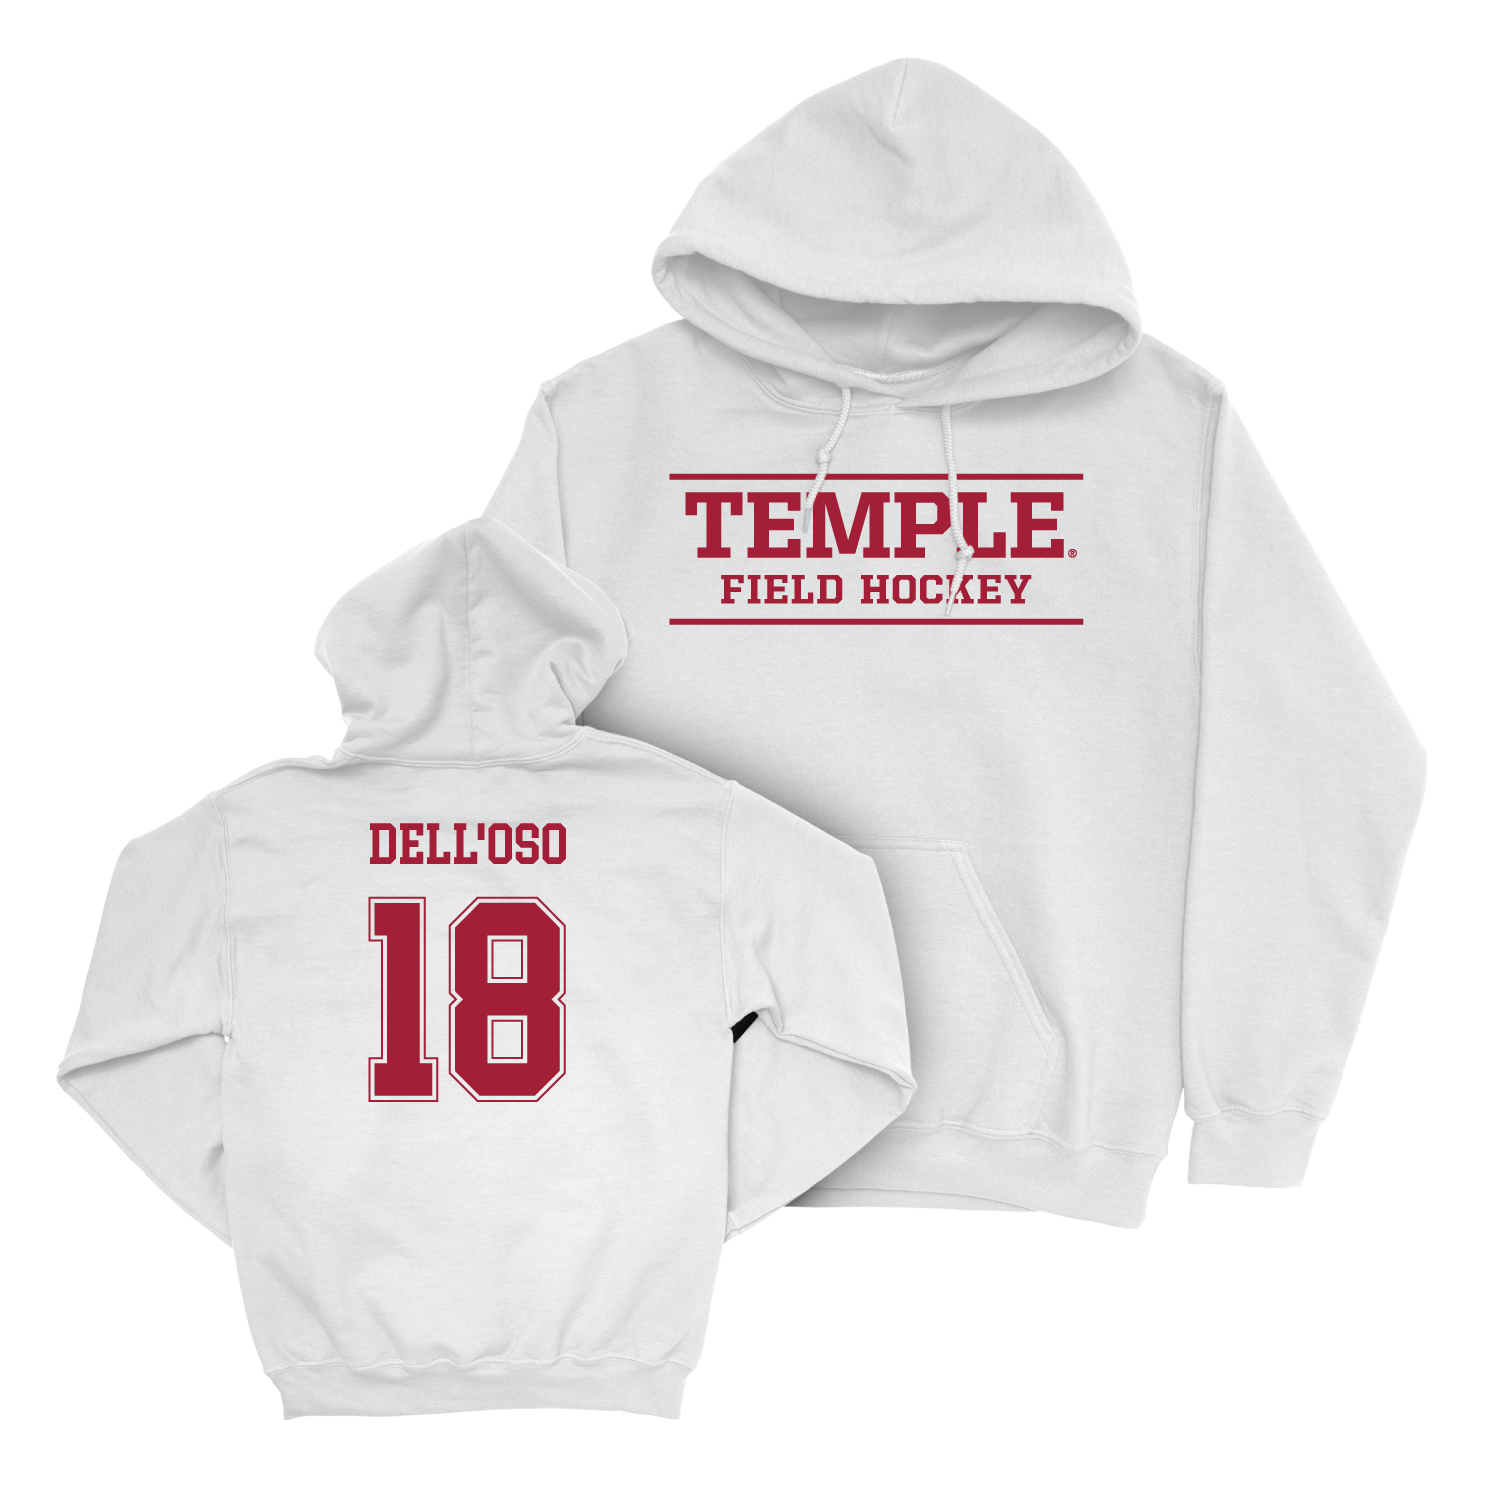 Women's Field Hockey White Classic Hoodie - Bella Dell'Oso Youth Small